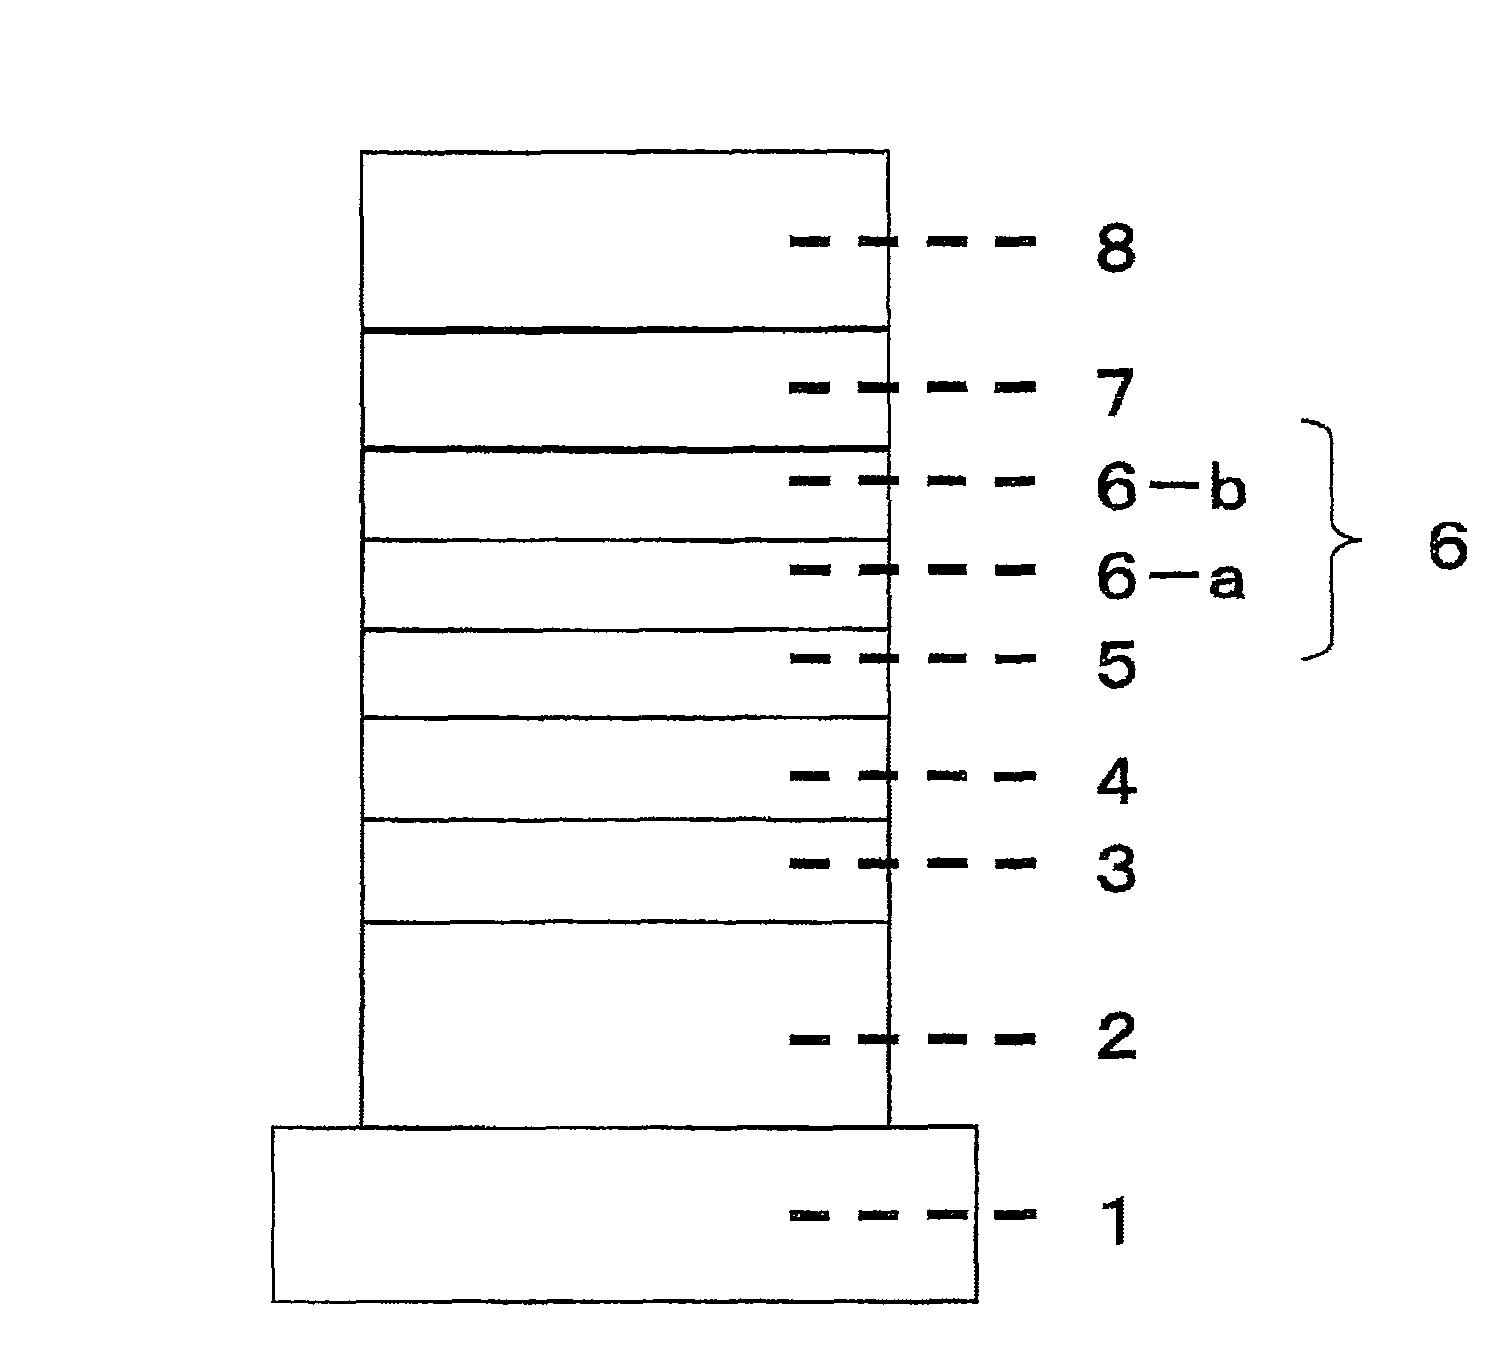 Organic electroluminescent device comprising a first electron-transporting layer and a second electron-transporting layer